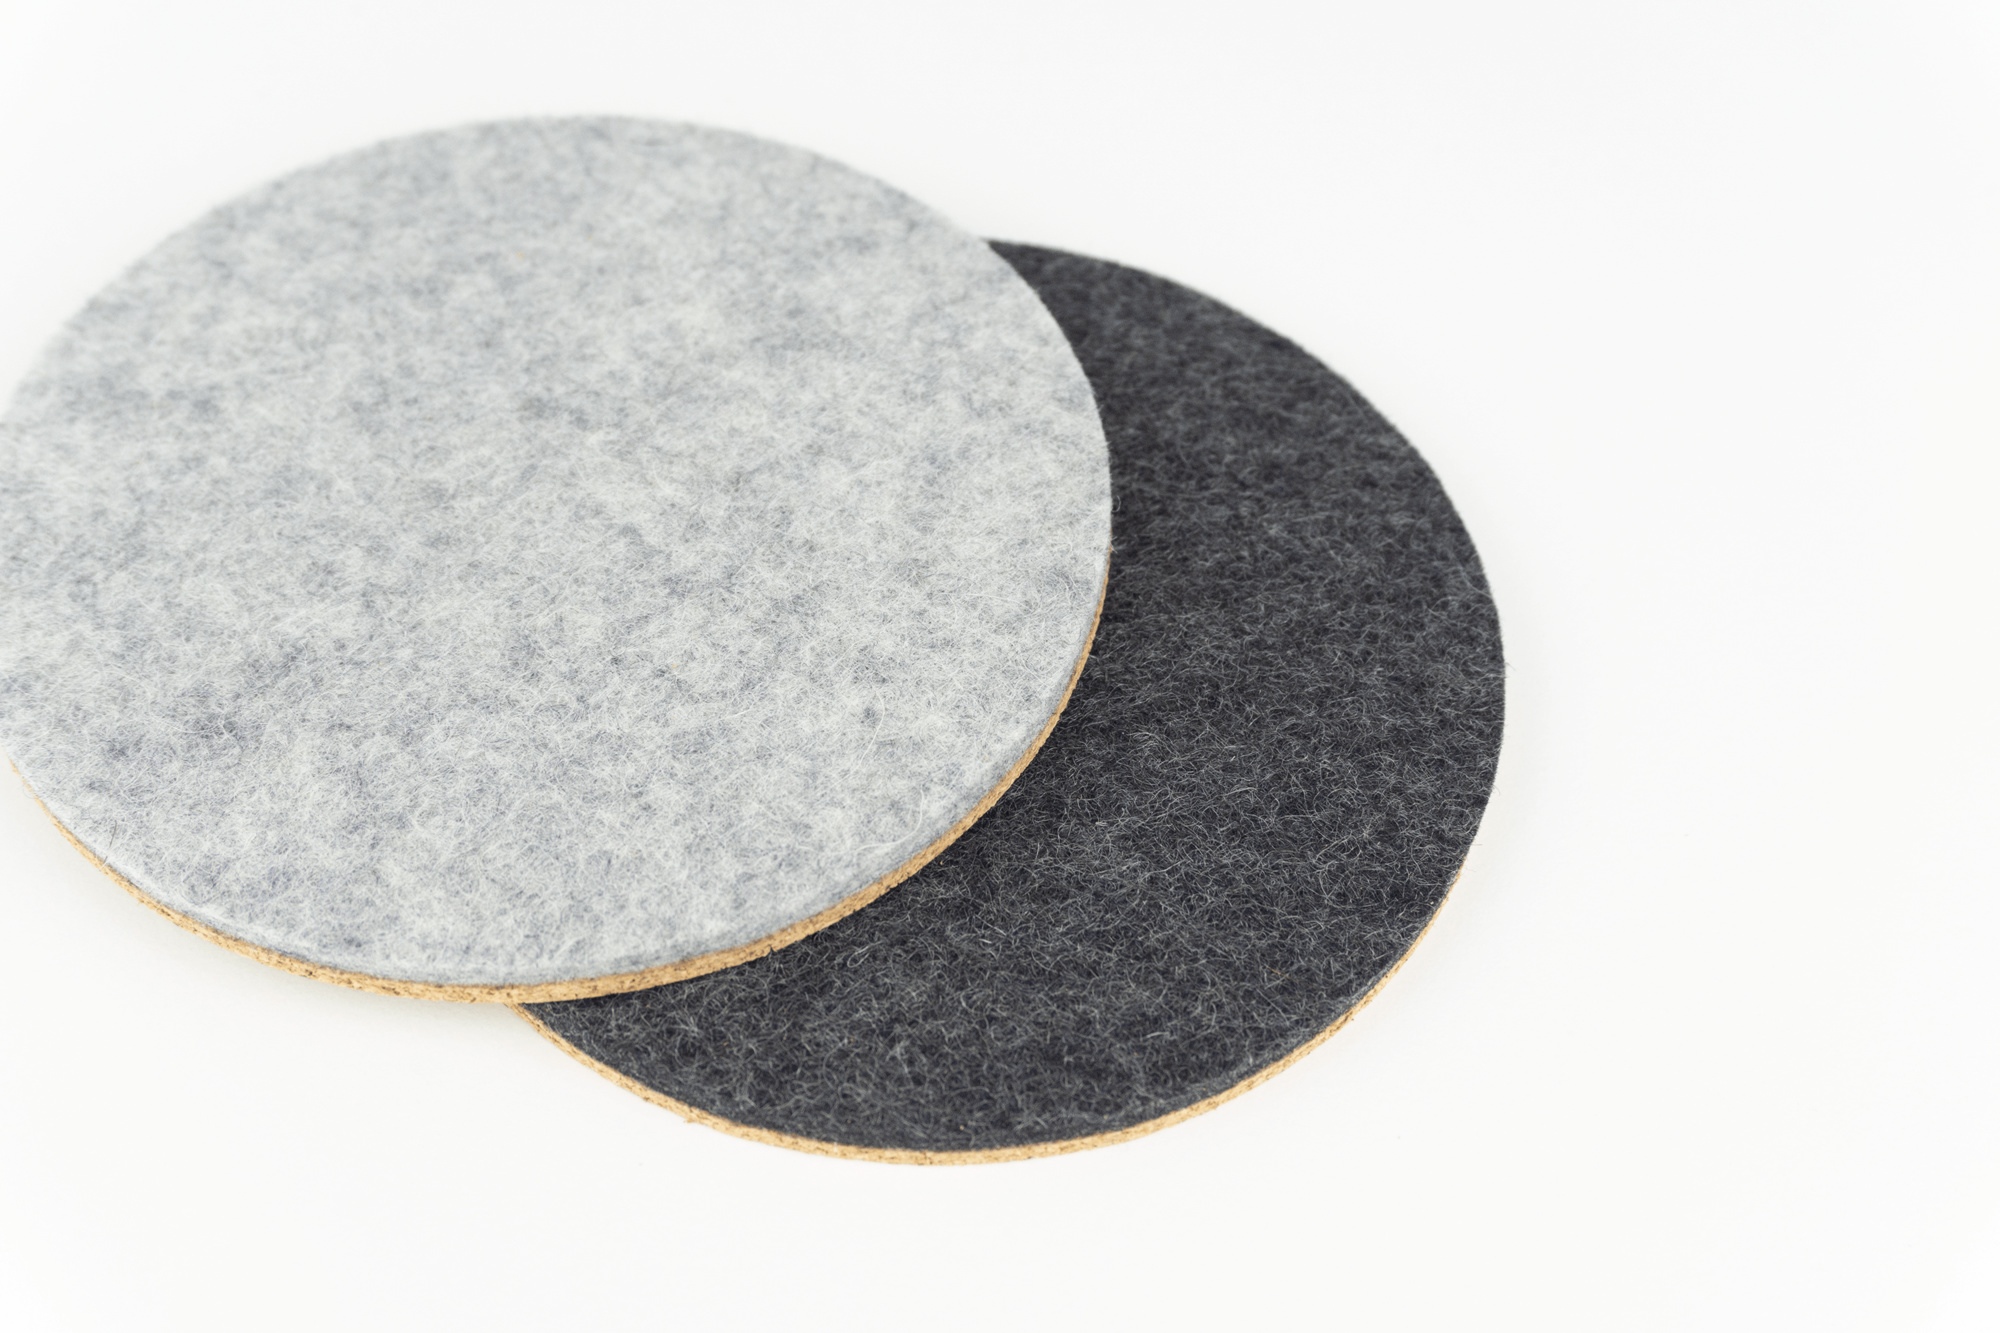 Colour comparison of our light grey and black circle desk coasters, shown against a white coffee table.